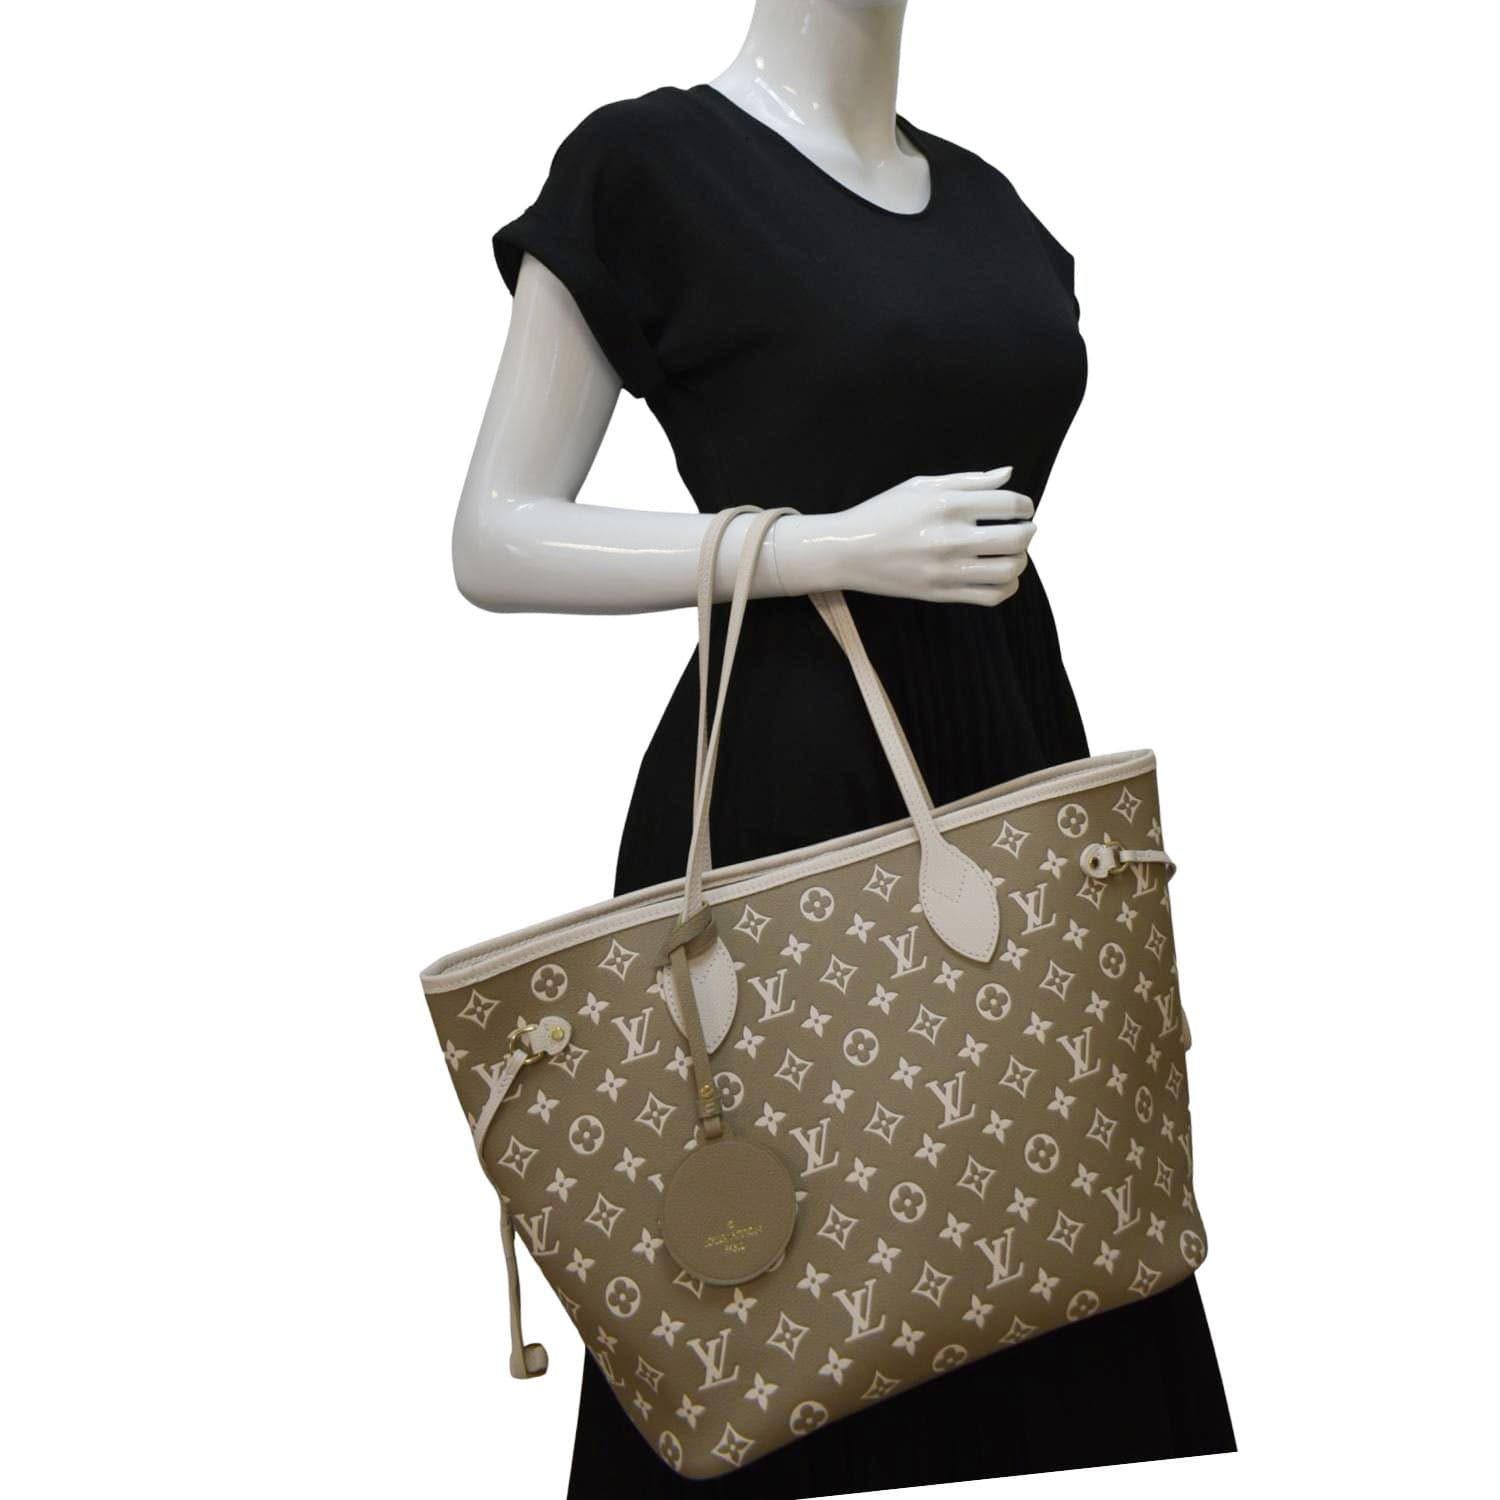 Louis Vuitton Neverfull Spring City Leather Tote Shoulder Bag